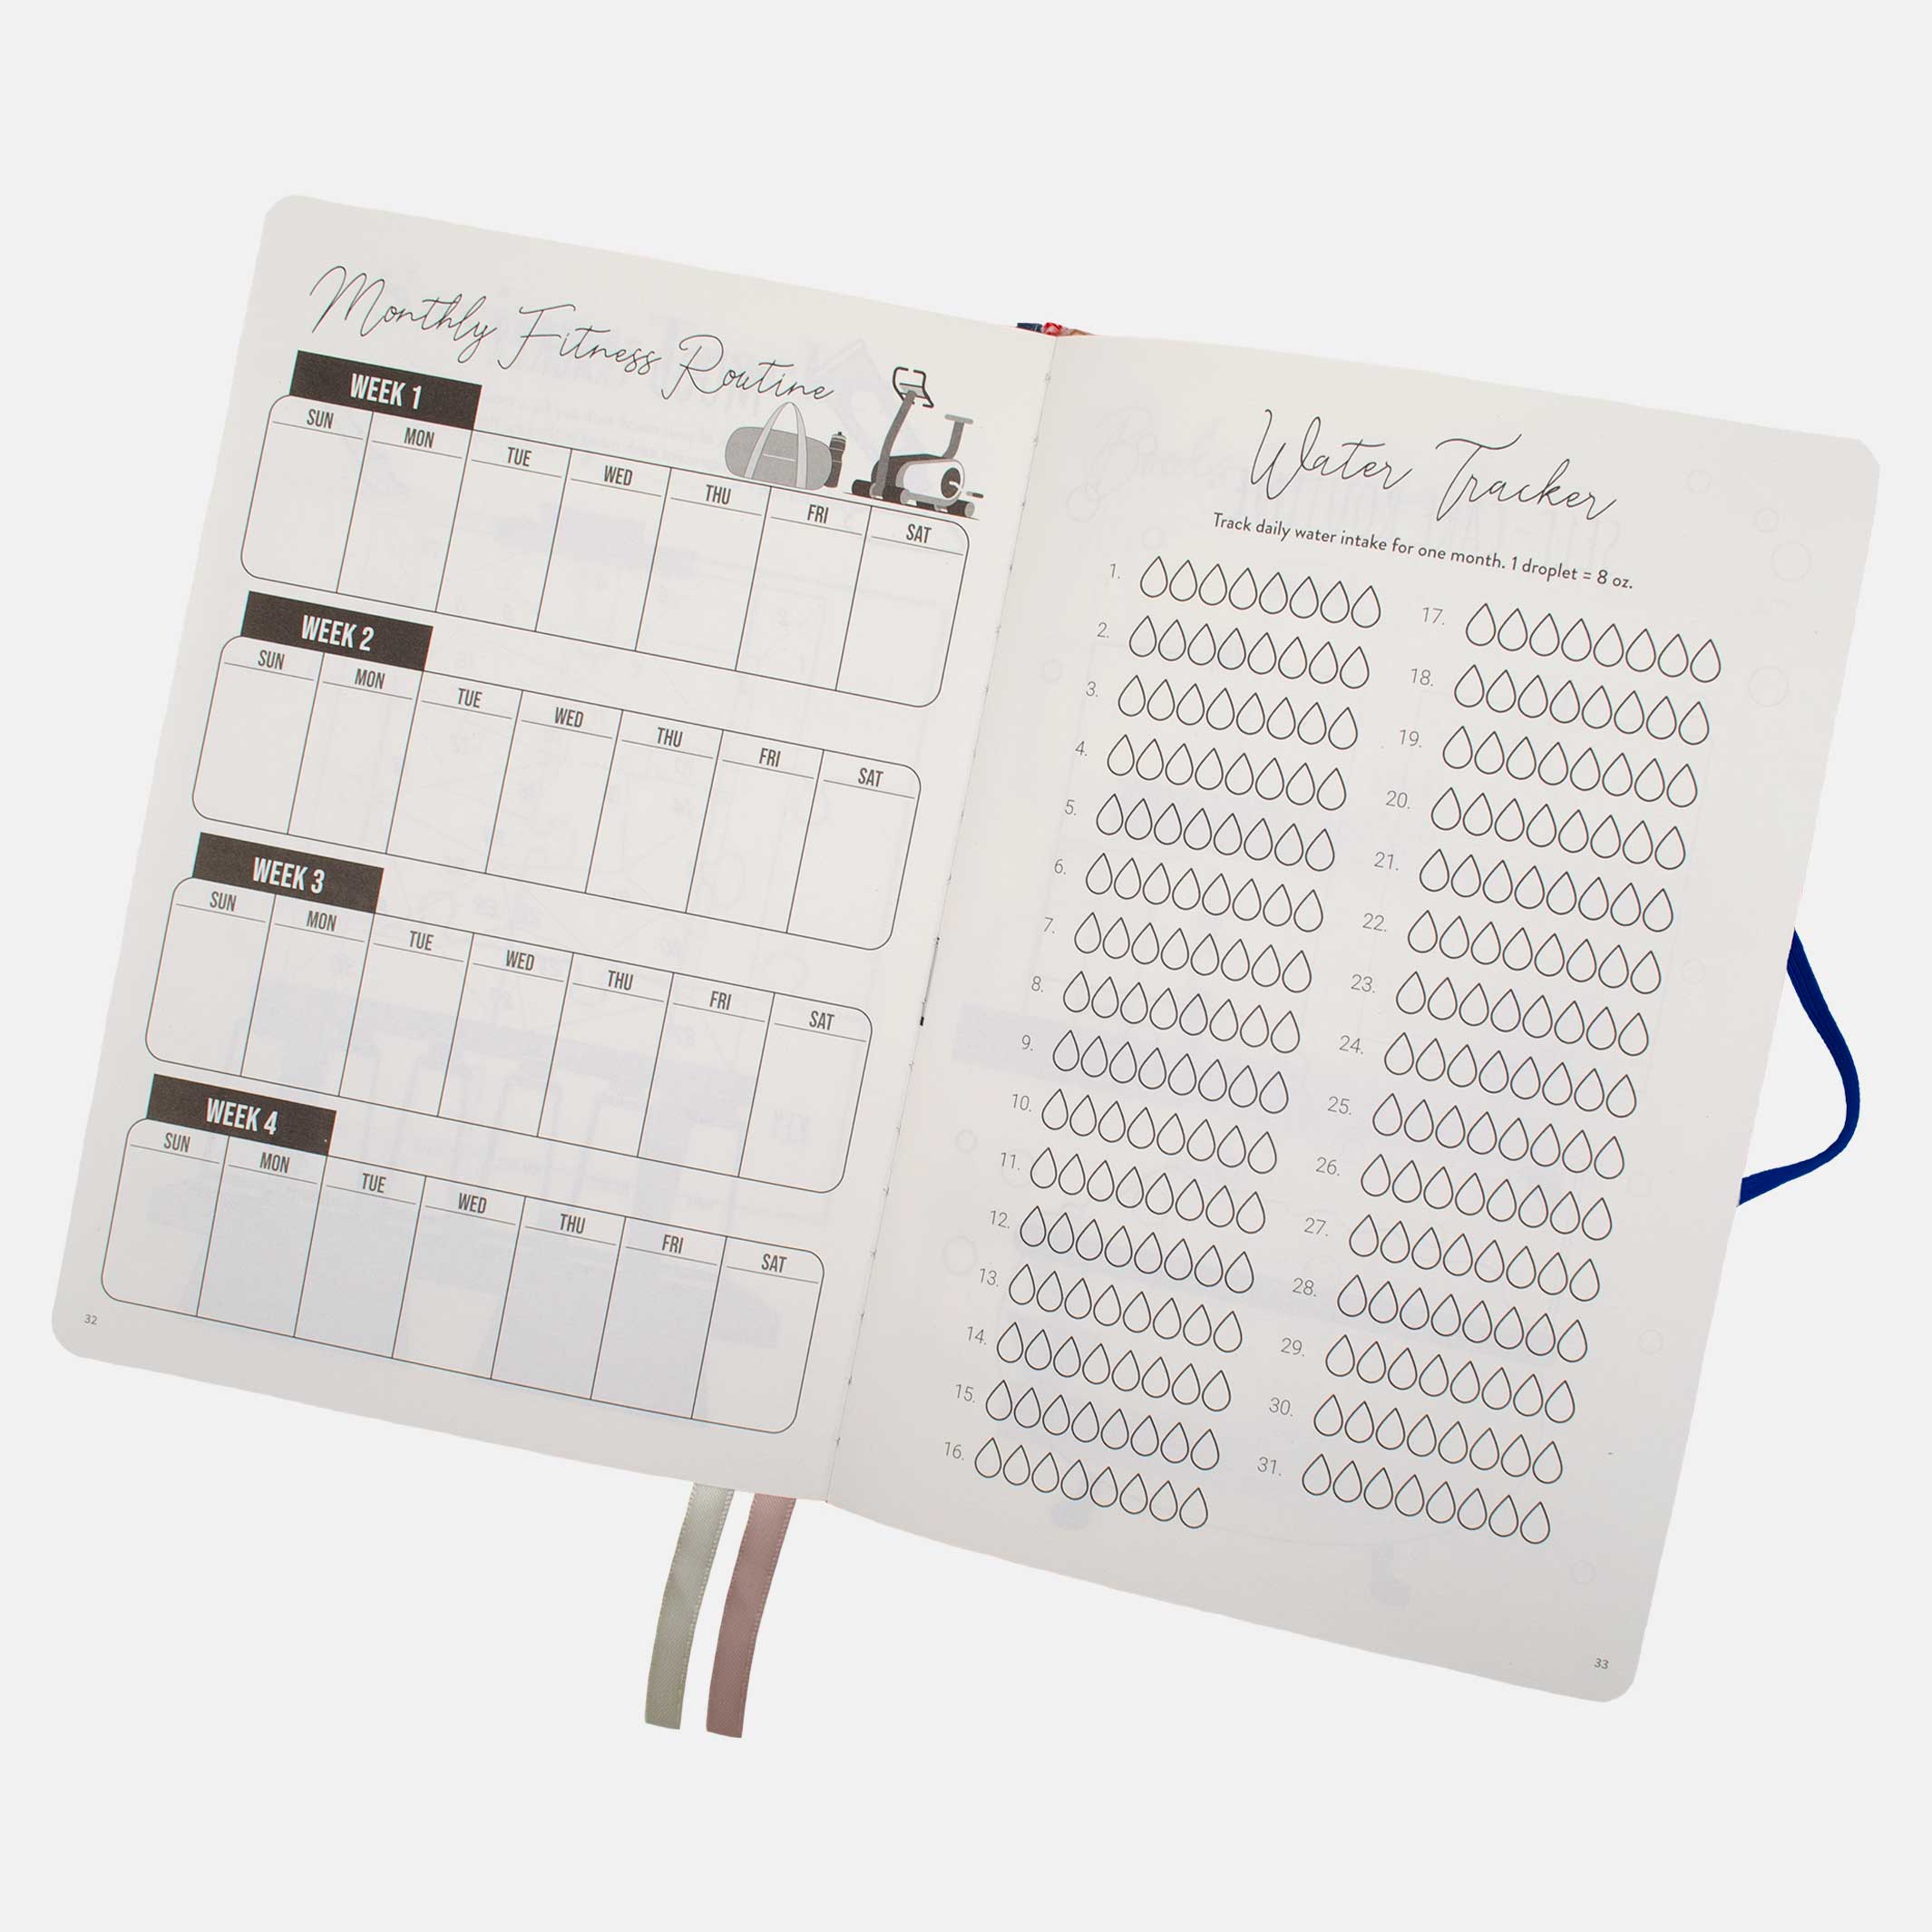 monthly fitness routine and hydration tracker in the 12 month undated planner.